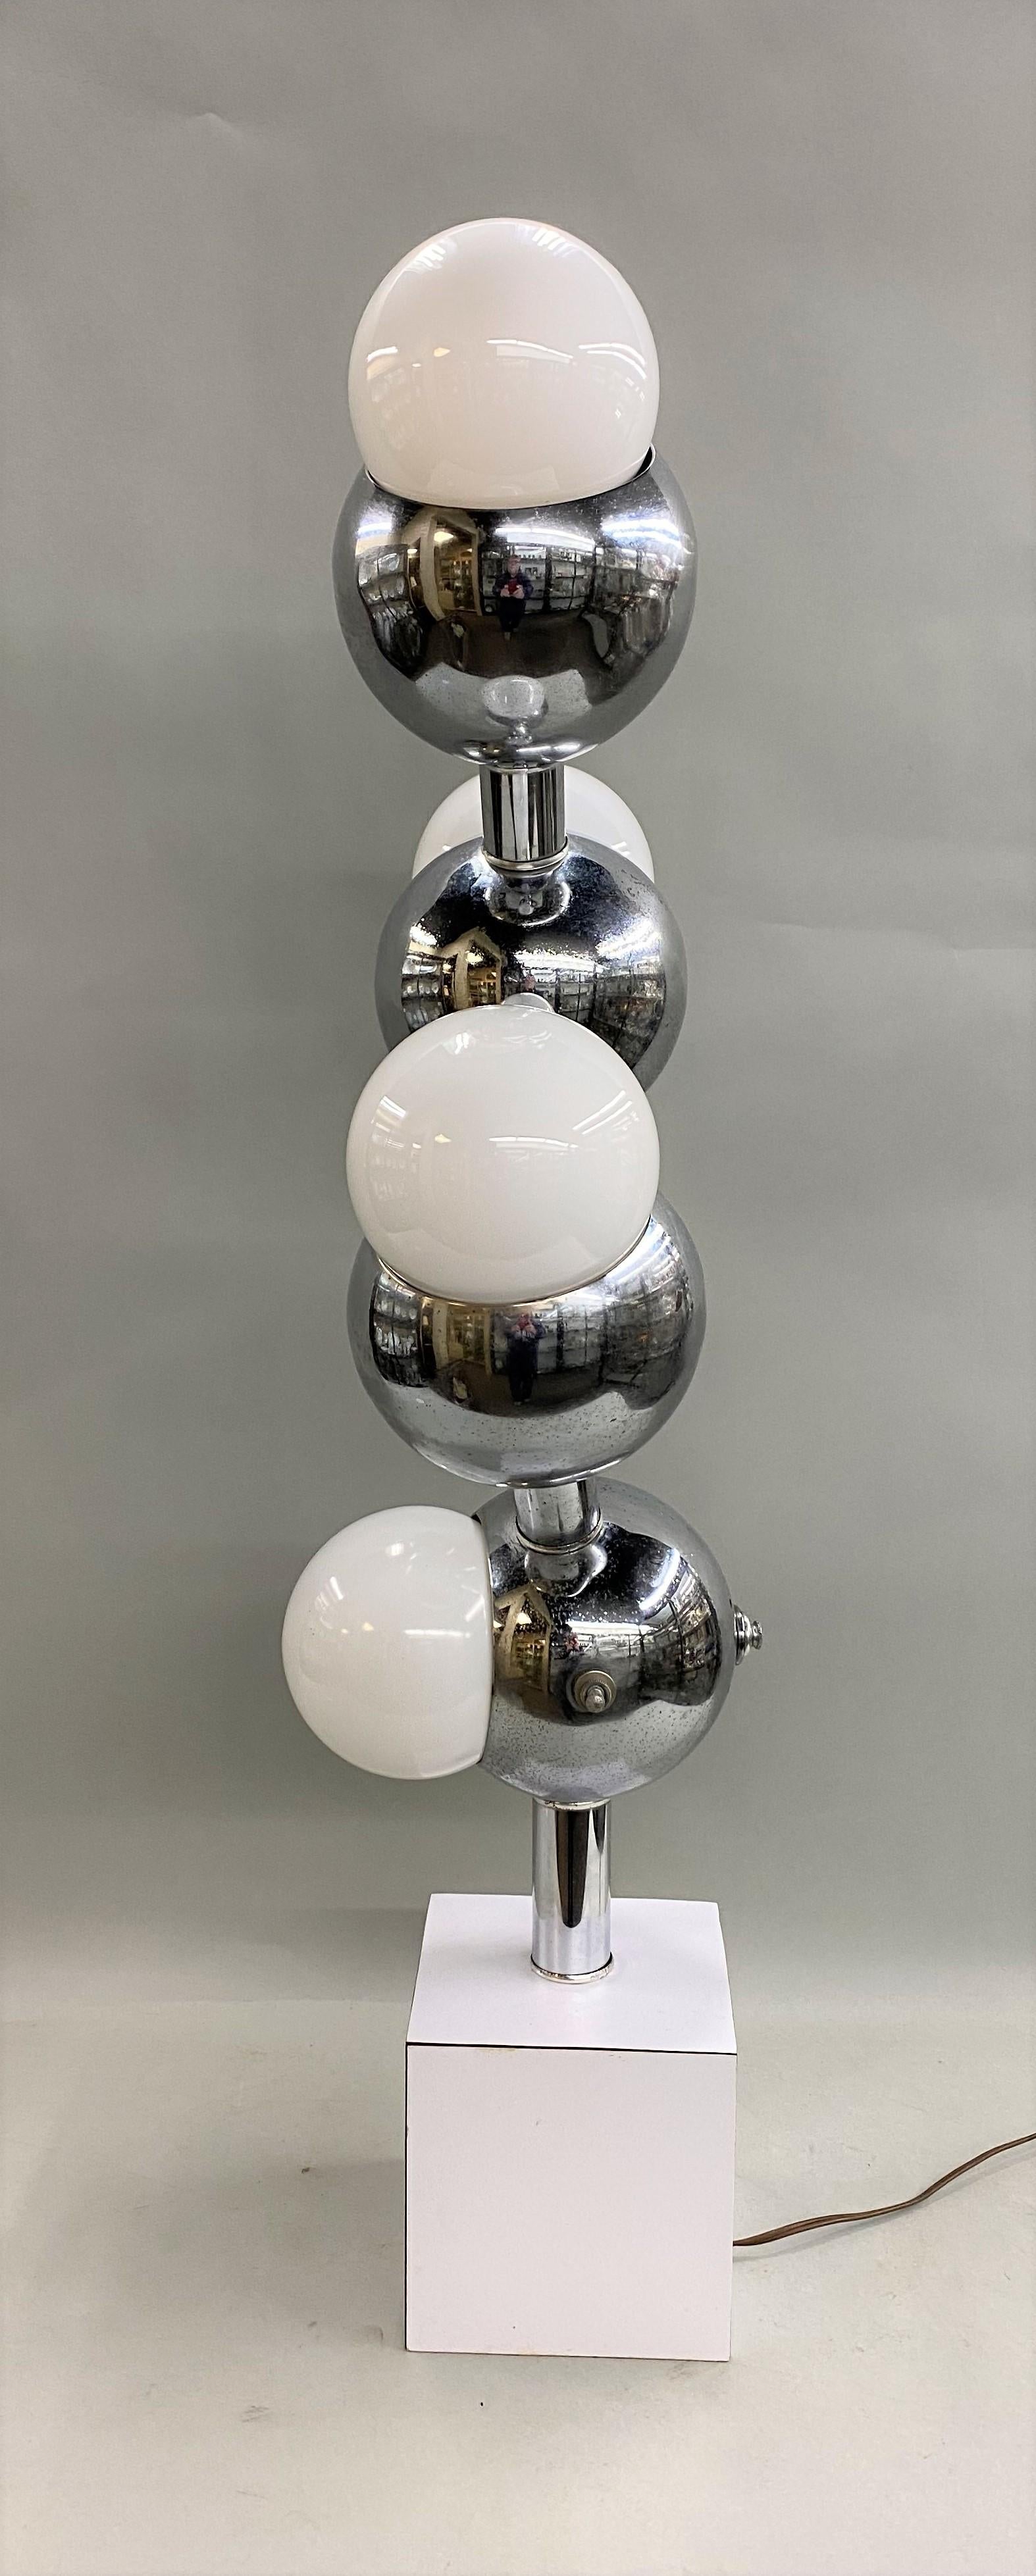 A fine example of an Atomic Age mid century molecule or eyeball chrome four- light table lamp with chrome finish and round frosted lightbulbs, designed by New York based designer Robert Sonneman, one of the pioneers of modern lighting, known for